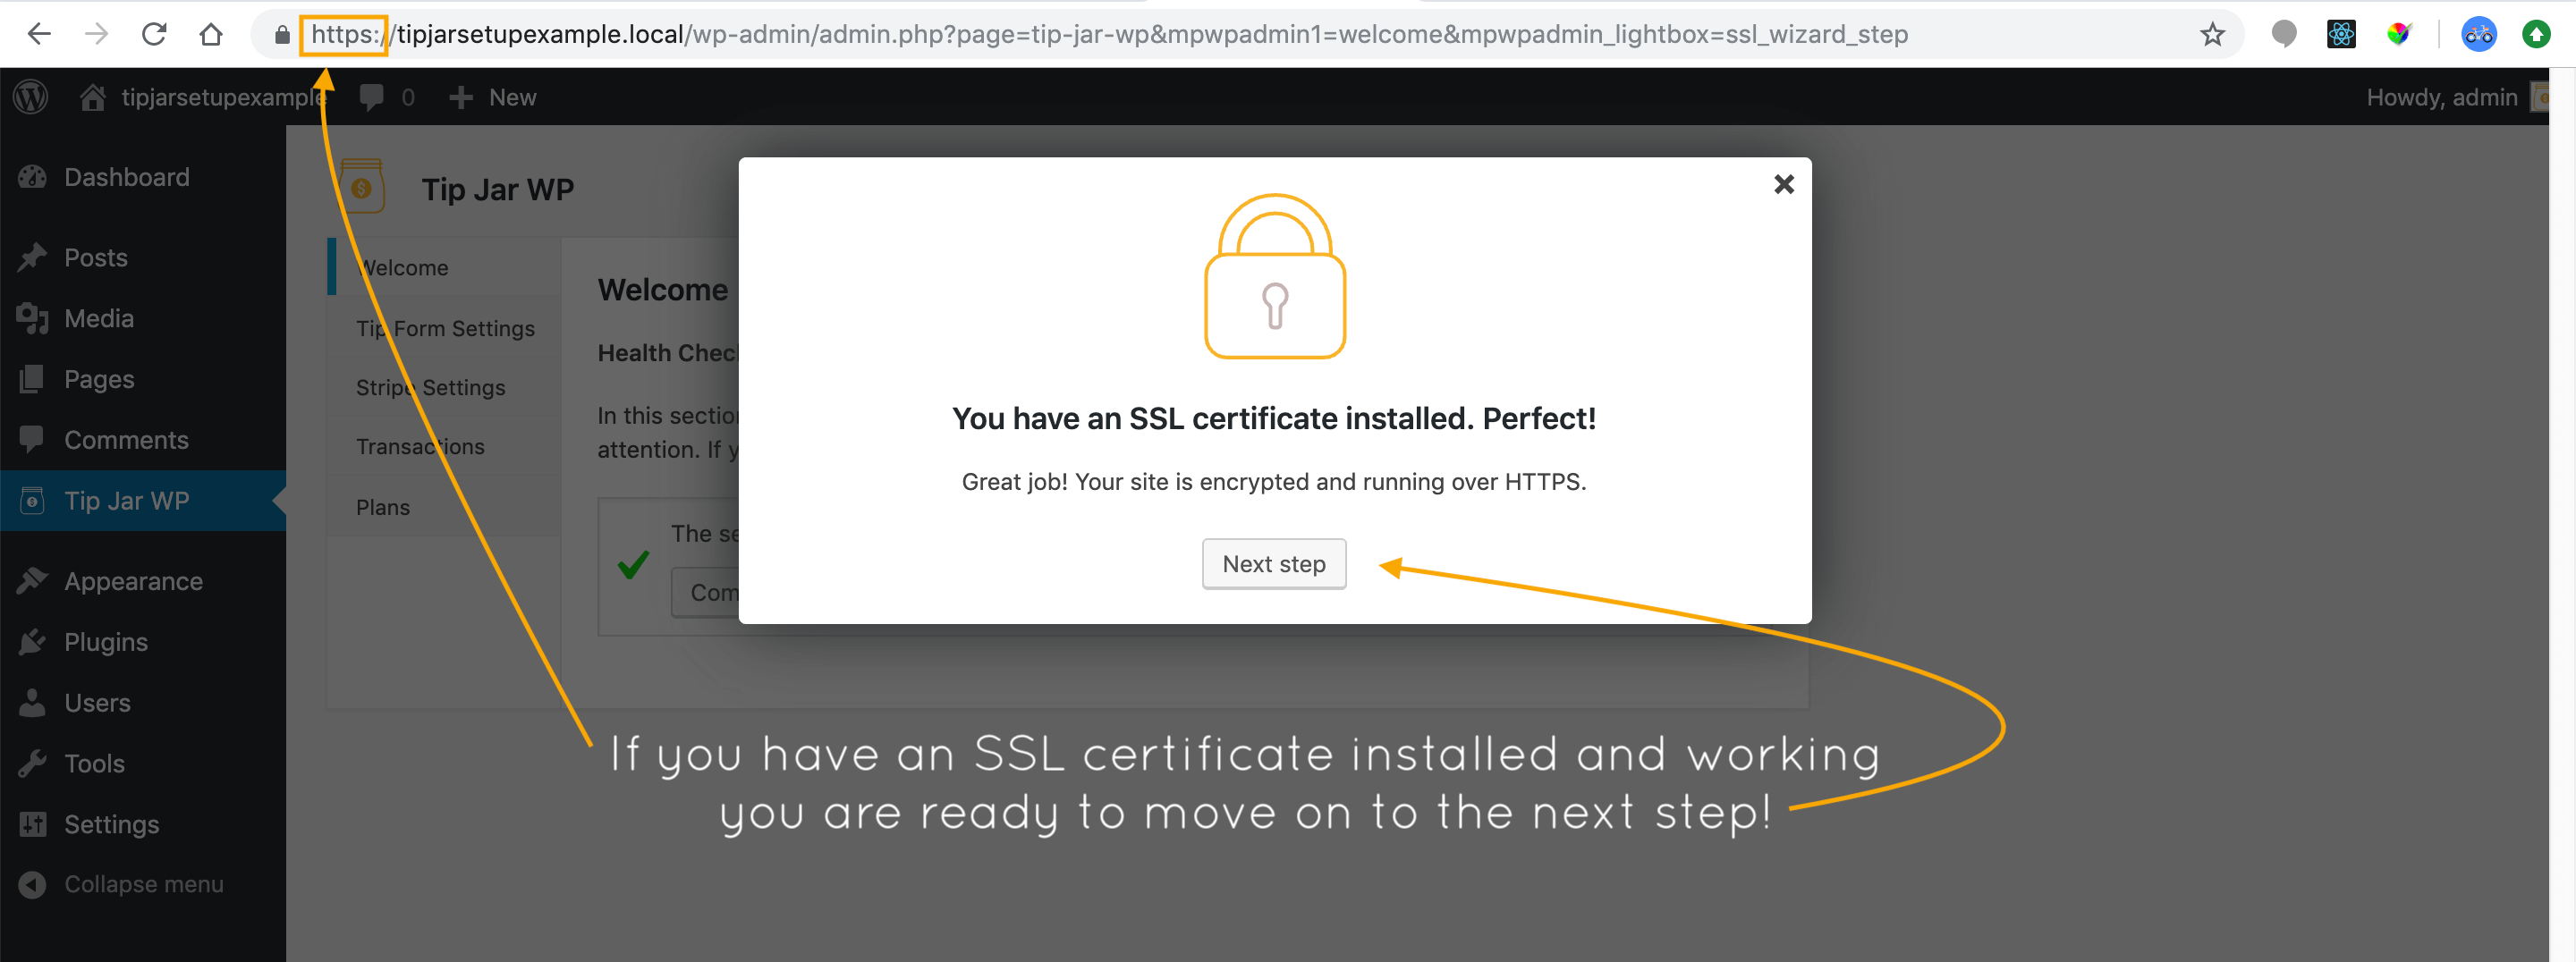 If/when you have an SSL certificate installed and working, you will be able to move to the next step!